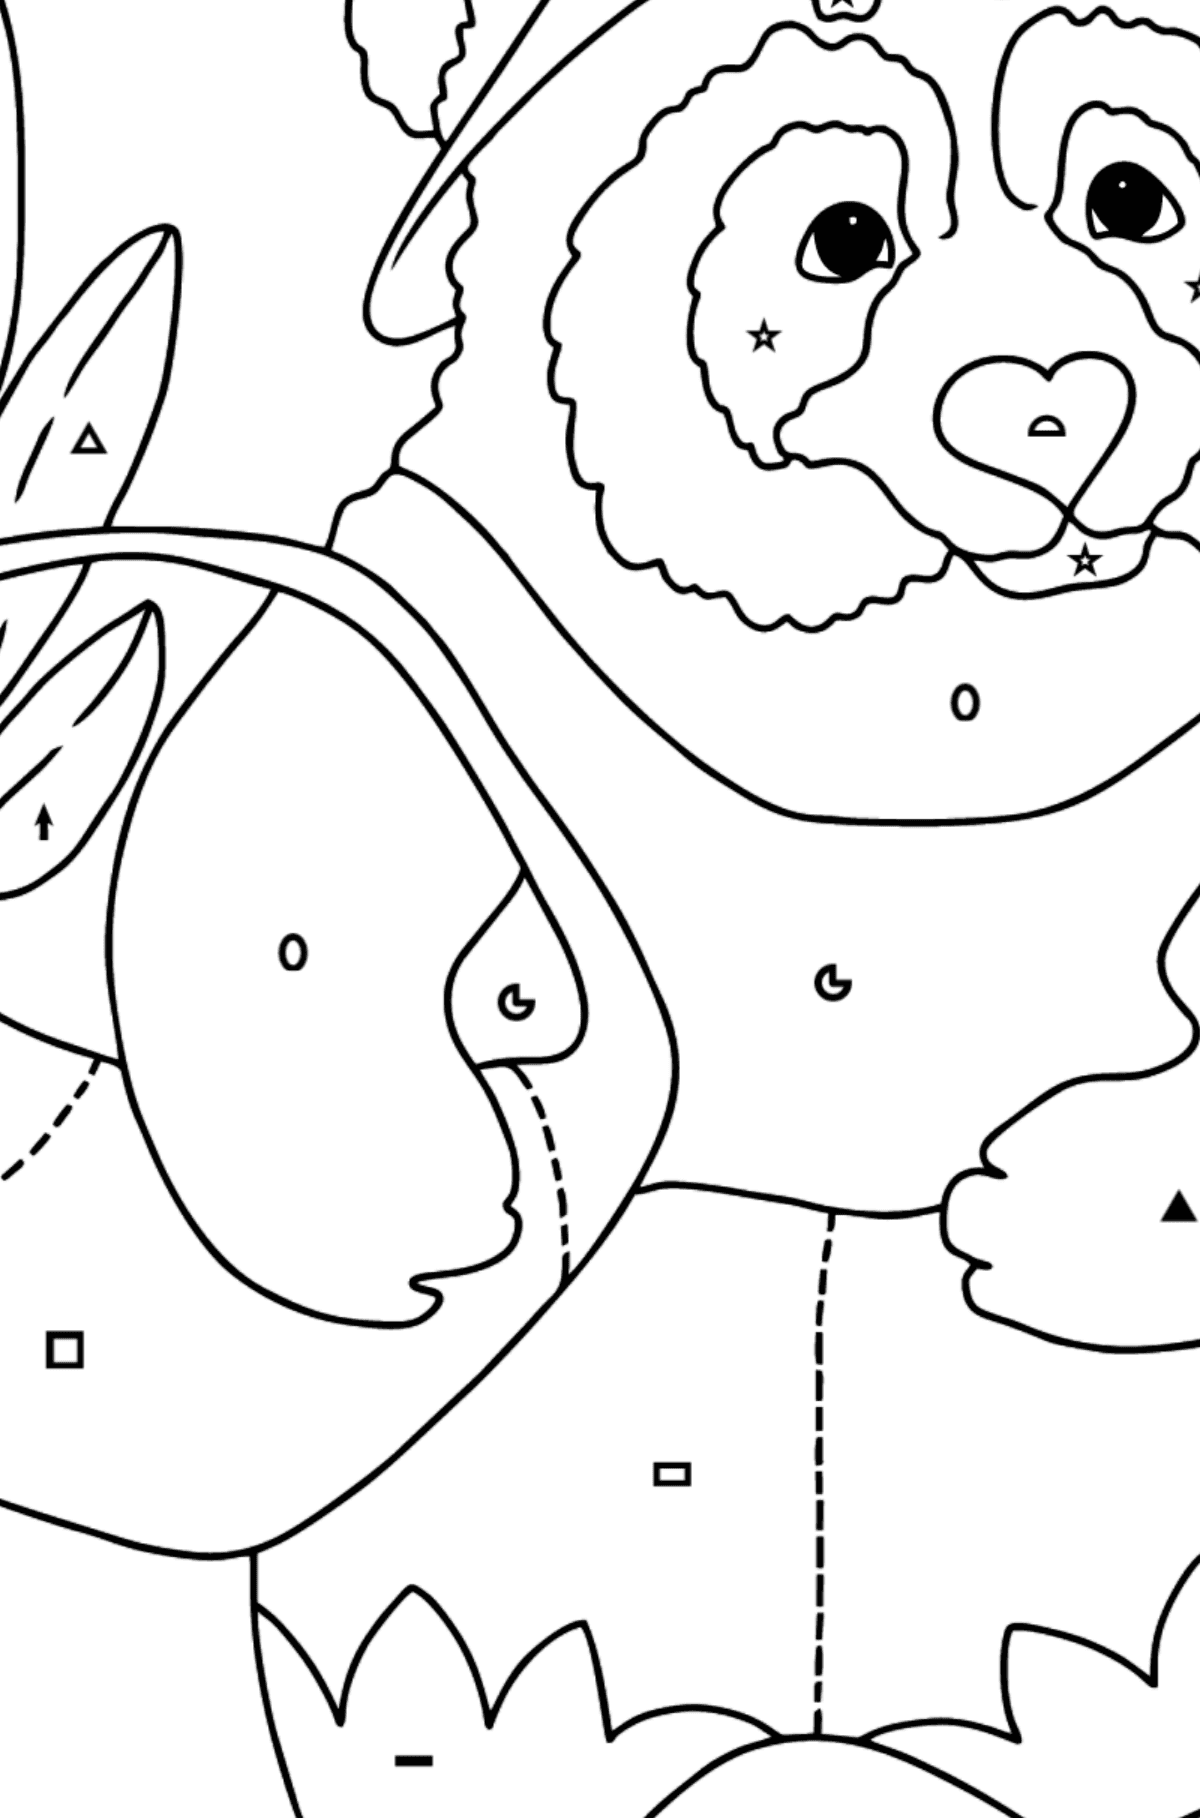 Kind Panda coloring page - Coloring by Symbols and Geometric Shapes for Kids